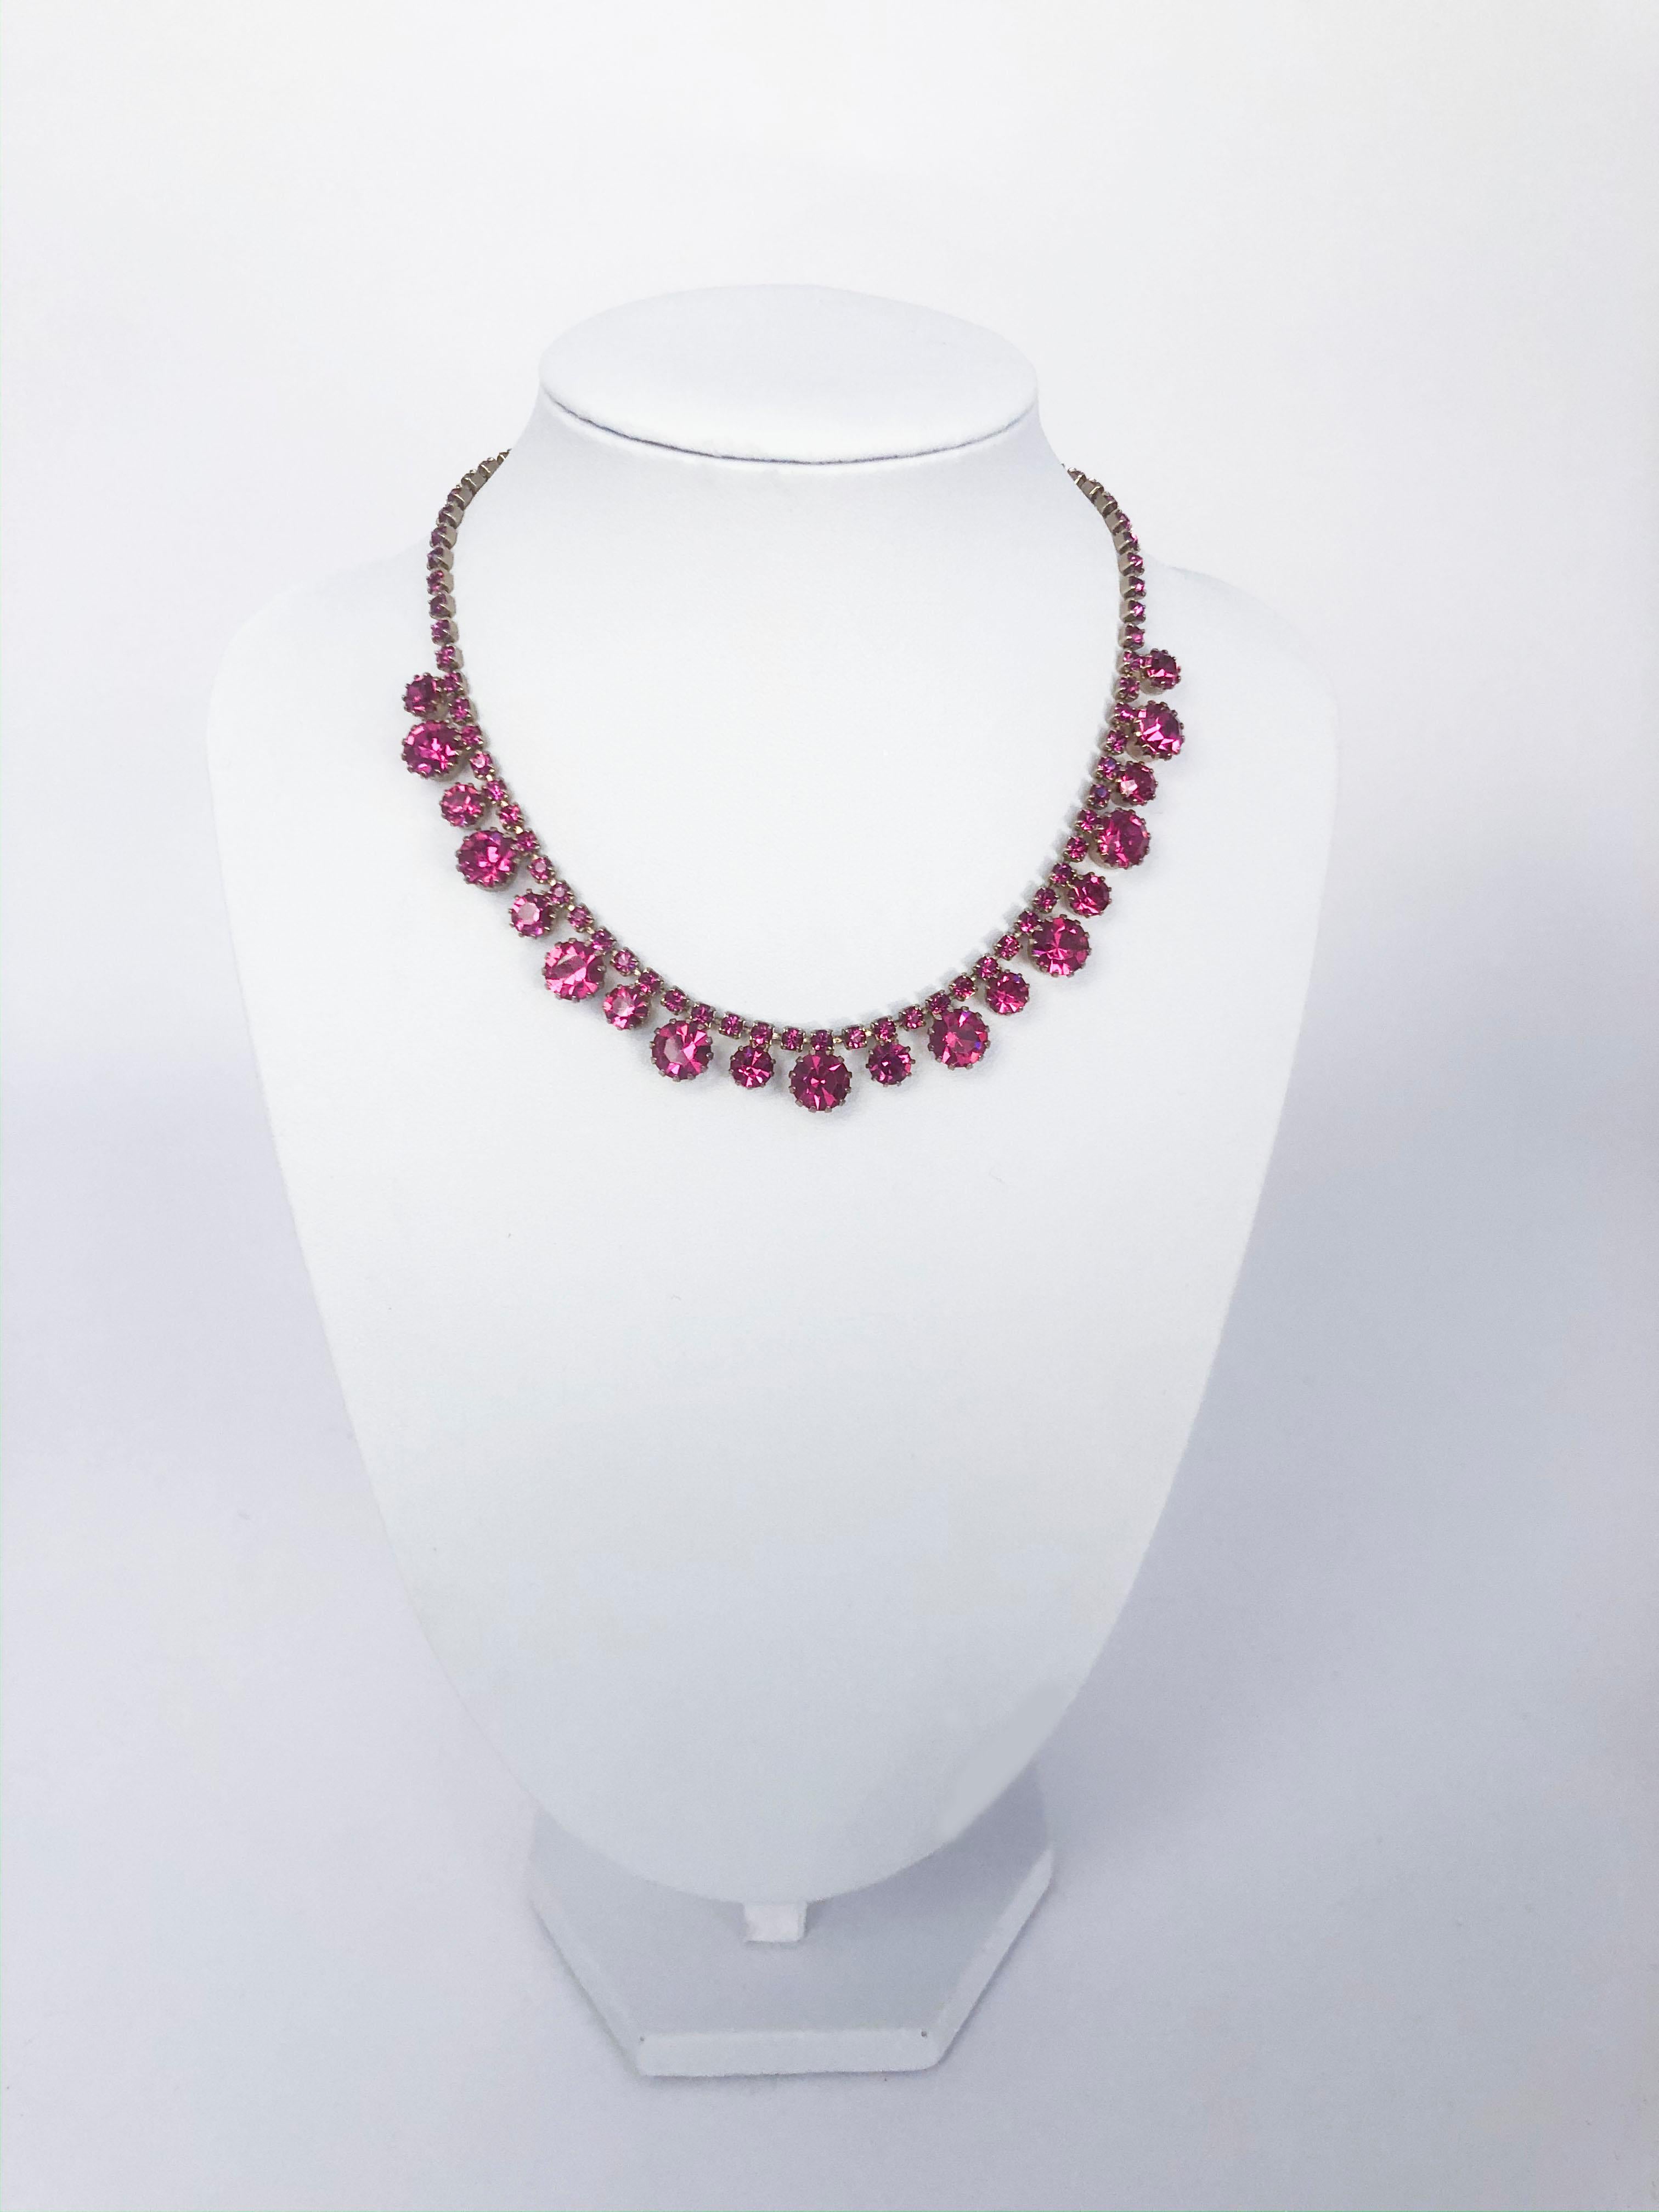 1950's Weiss necklace and earring set featuring large, medium, and small cut rhinestones in hot pink. The clip-on earrings are in a clover shape featuring matching rhinestones and the setting metal for this set has a gold wash. The necklace has a